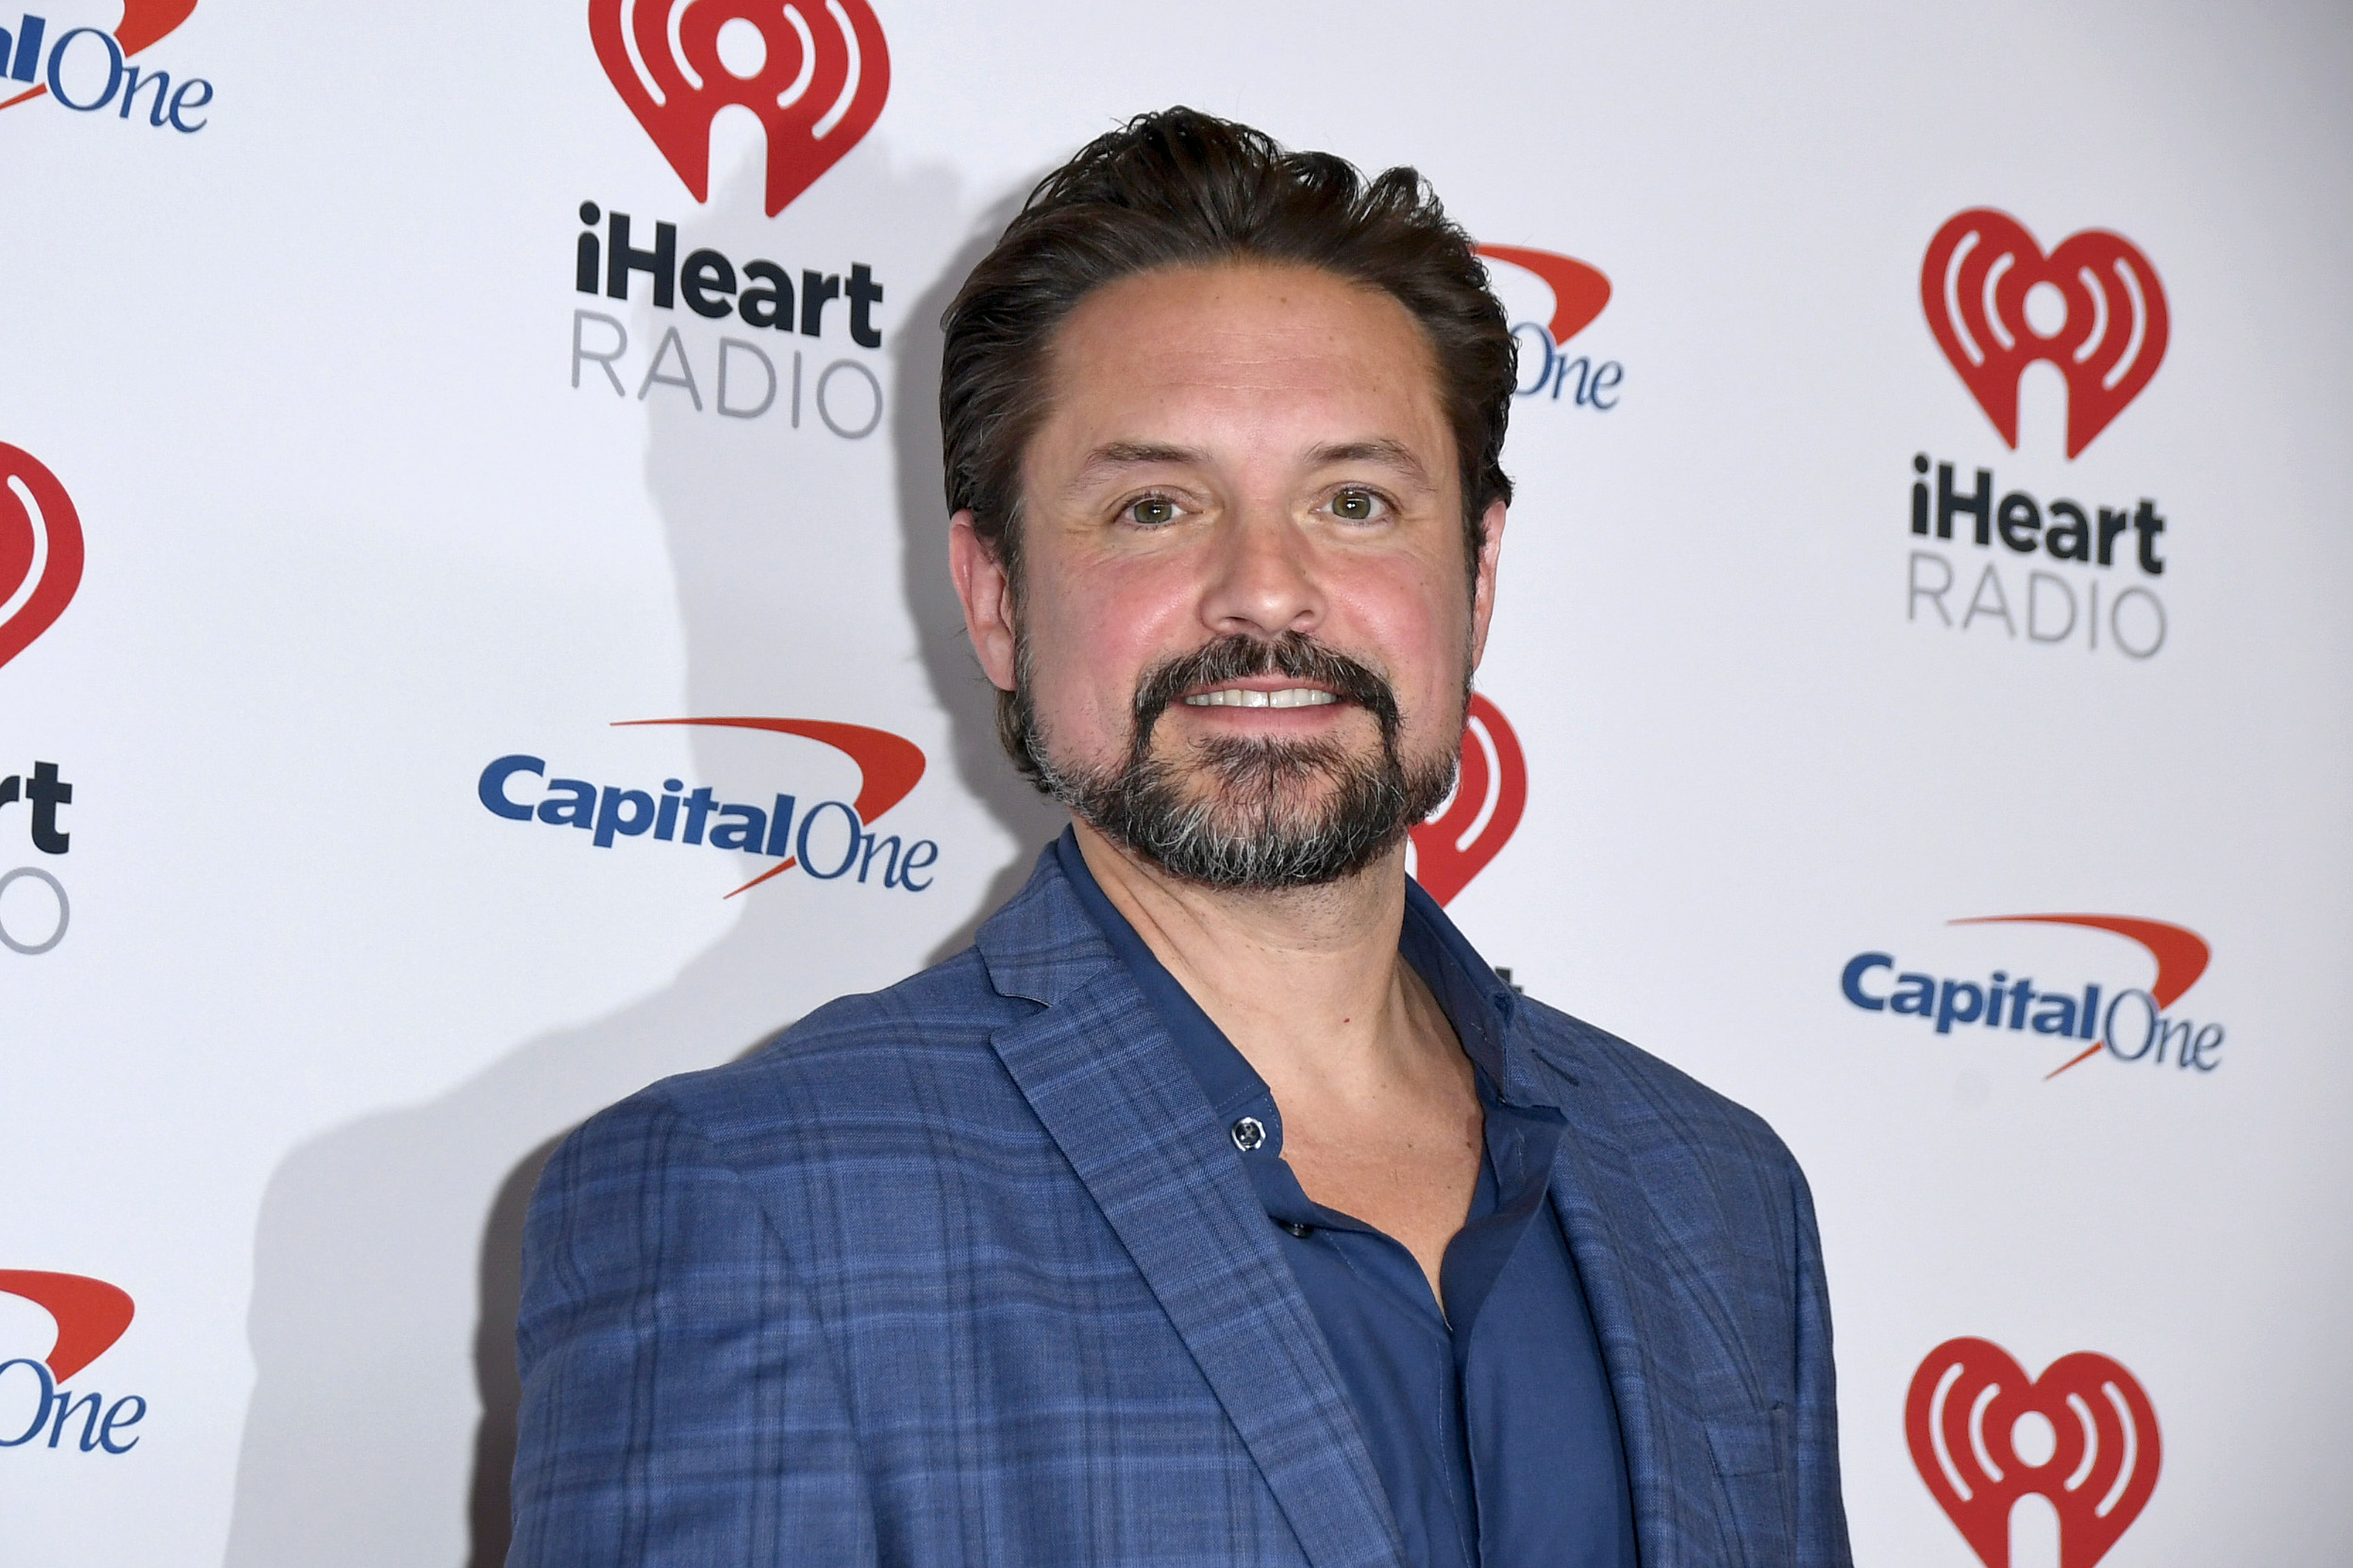 Man in blue shirt posing at iHeart Radio event